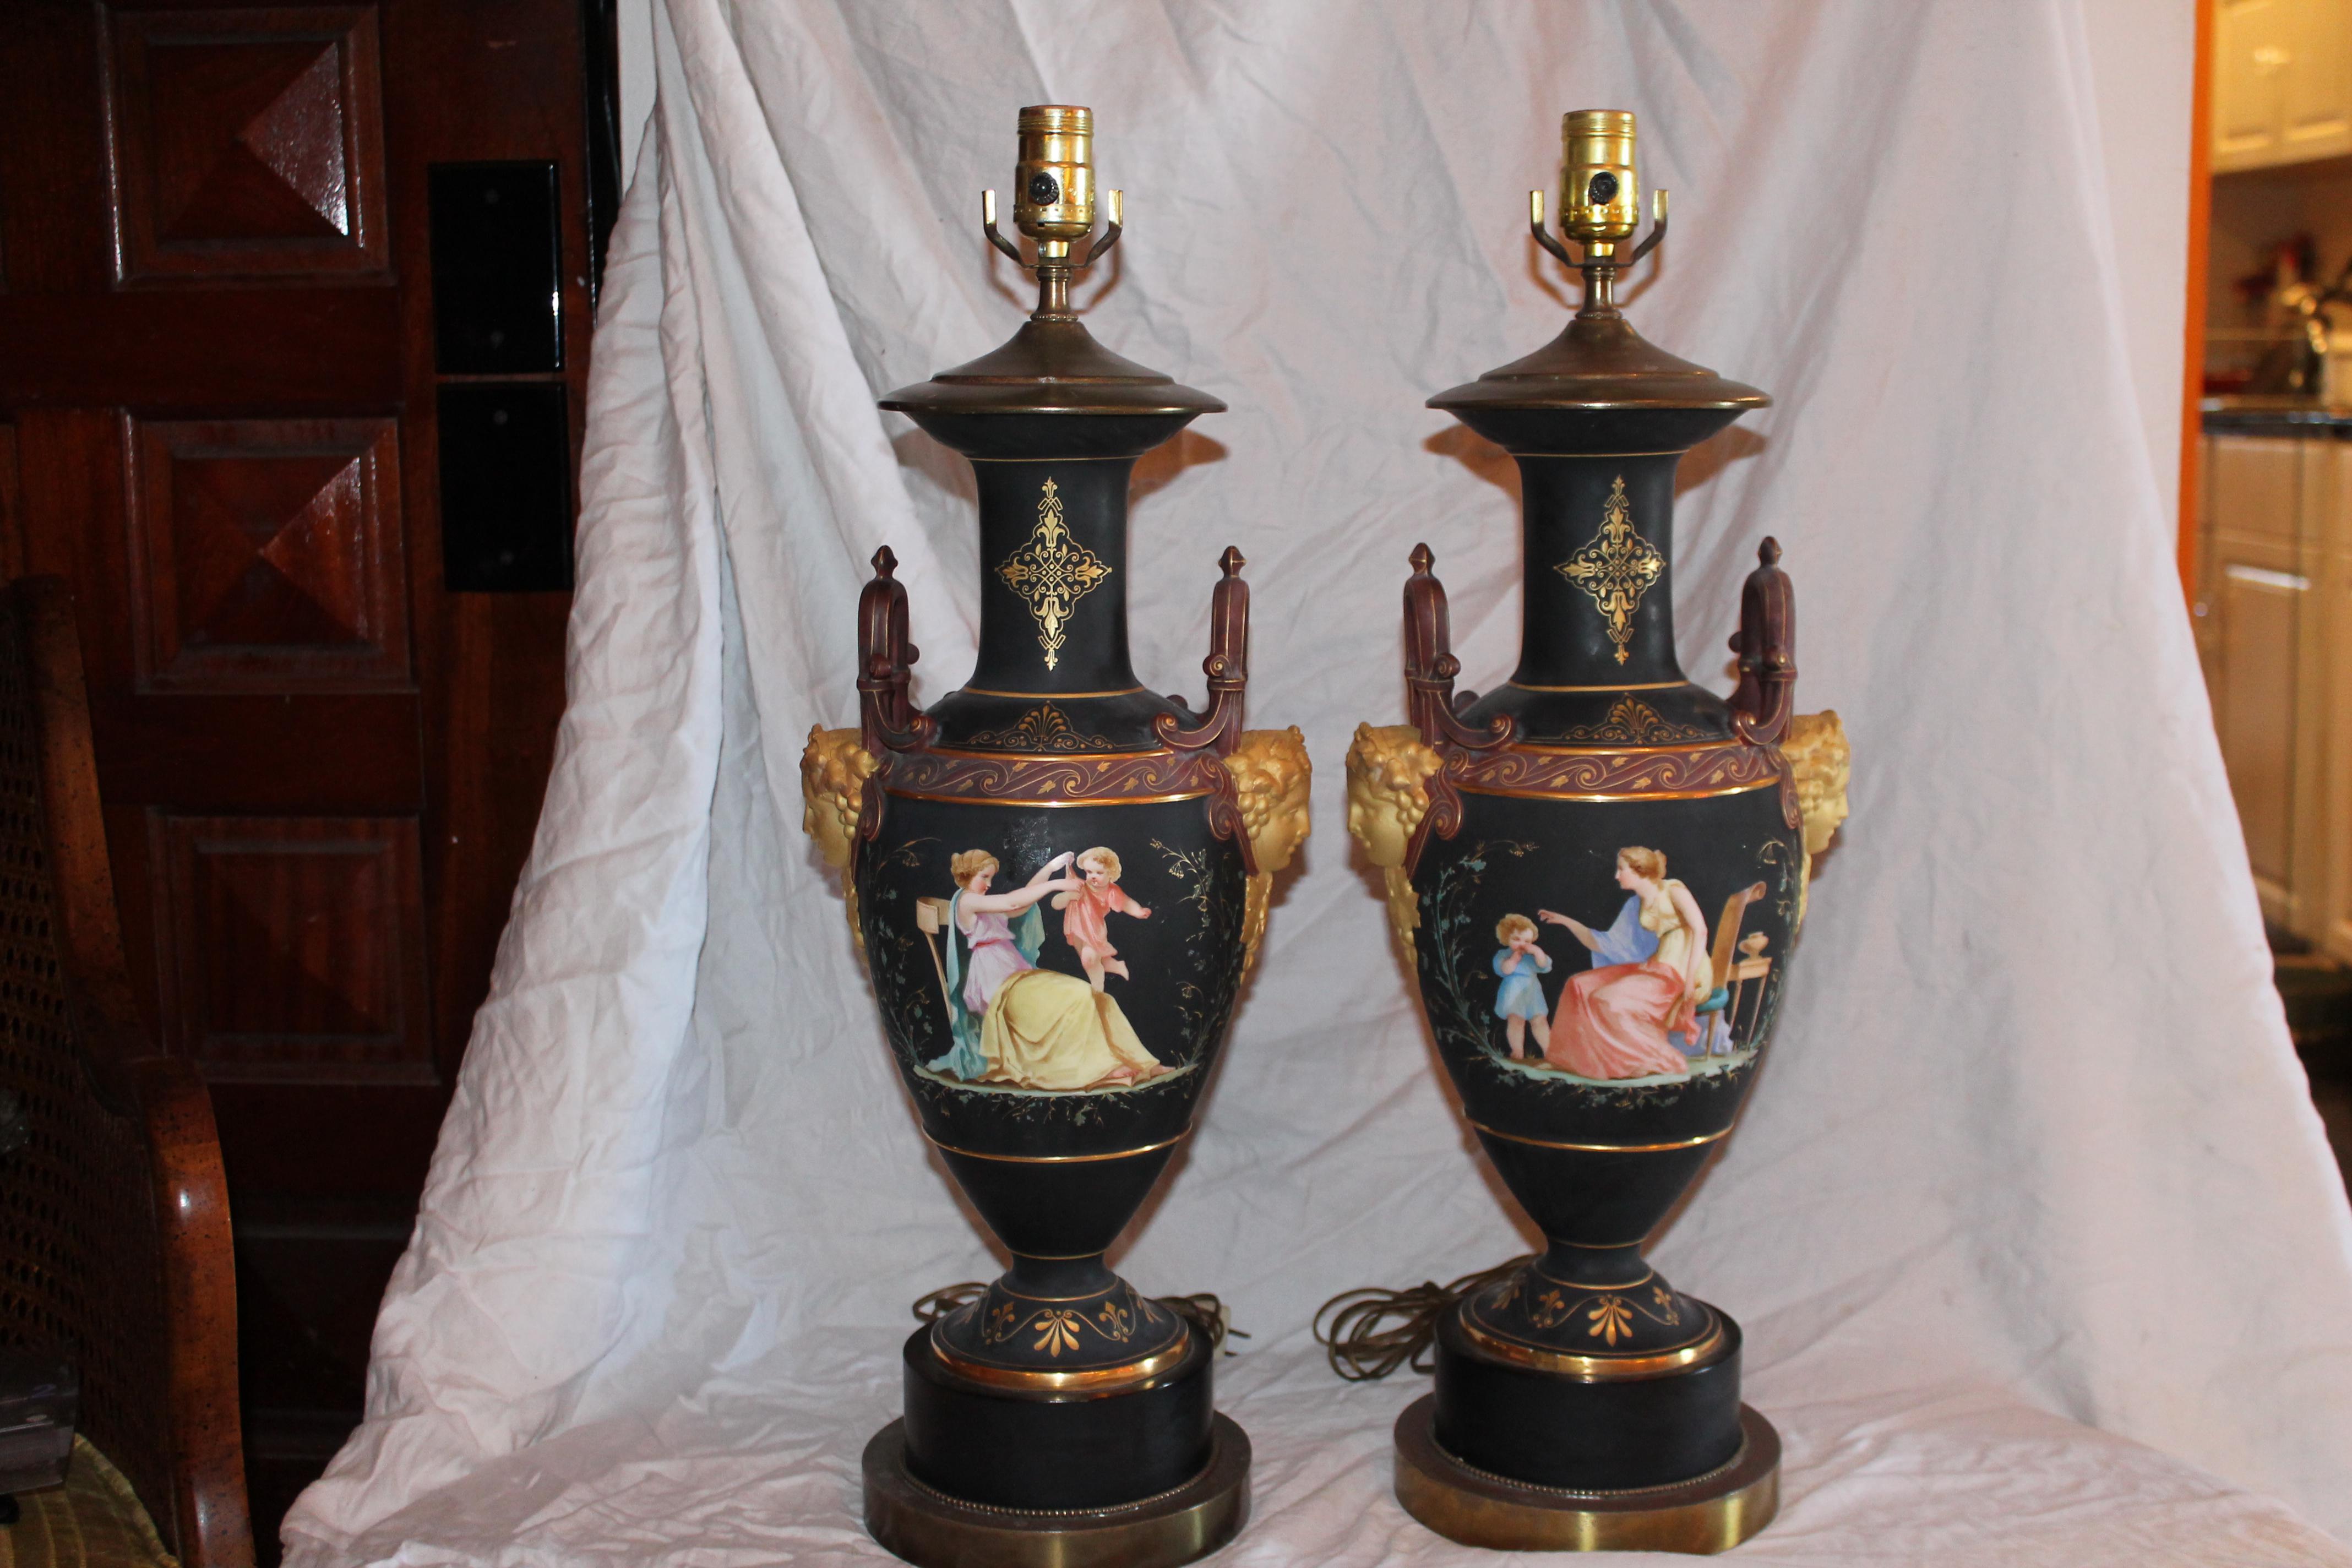 Pair c1900 French Louis XIV style Black Bisque Table Lamps. Beautifully decorate in Cherub/ Maiden detail. These lamps are stunning and in very good condition with no issues. 